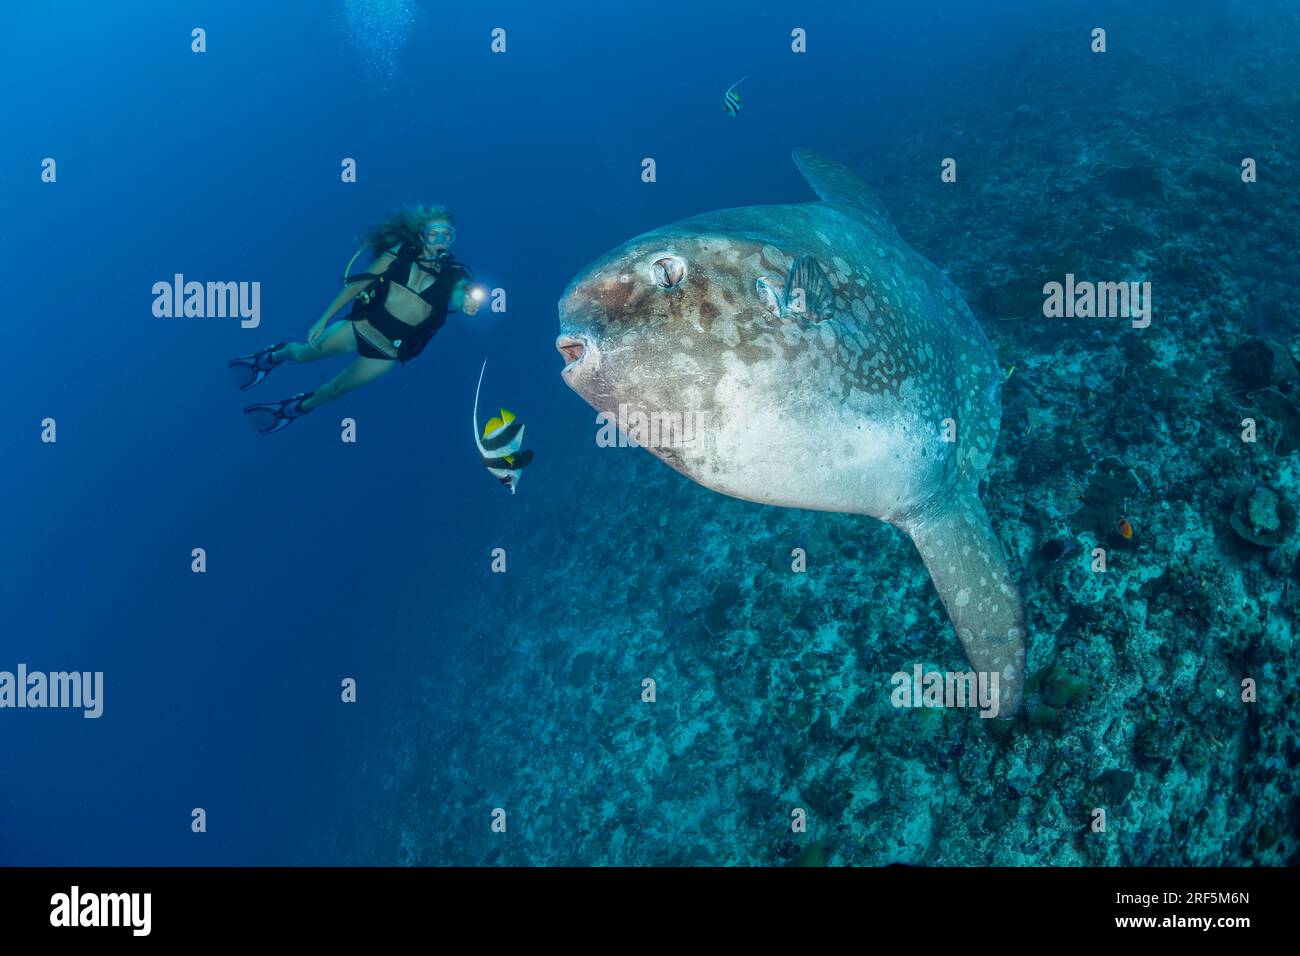 Diver (MR) looks on as this ocean sunfish, Mola mola, gets cleaned by longfin bannerfish, Crystal Bay, Nusa Penida, Bali Island, Indonesia, Pacific Oc Stock Photo